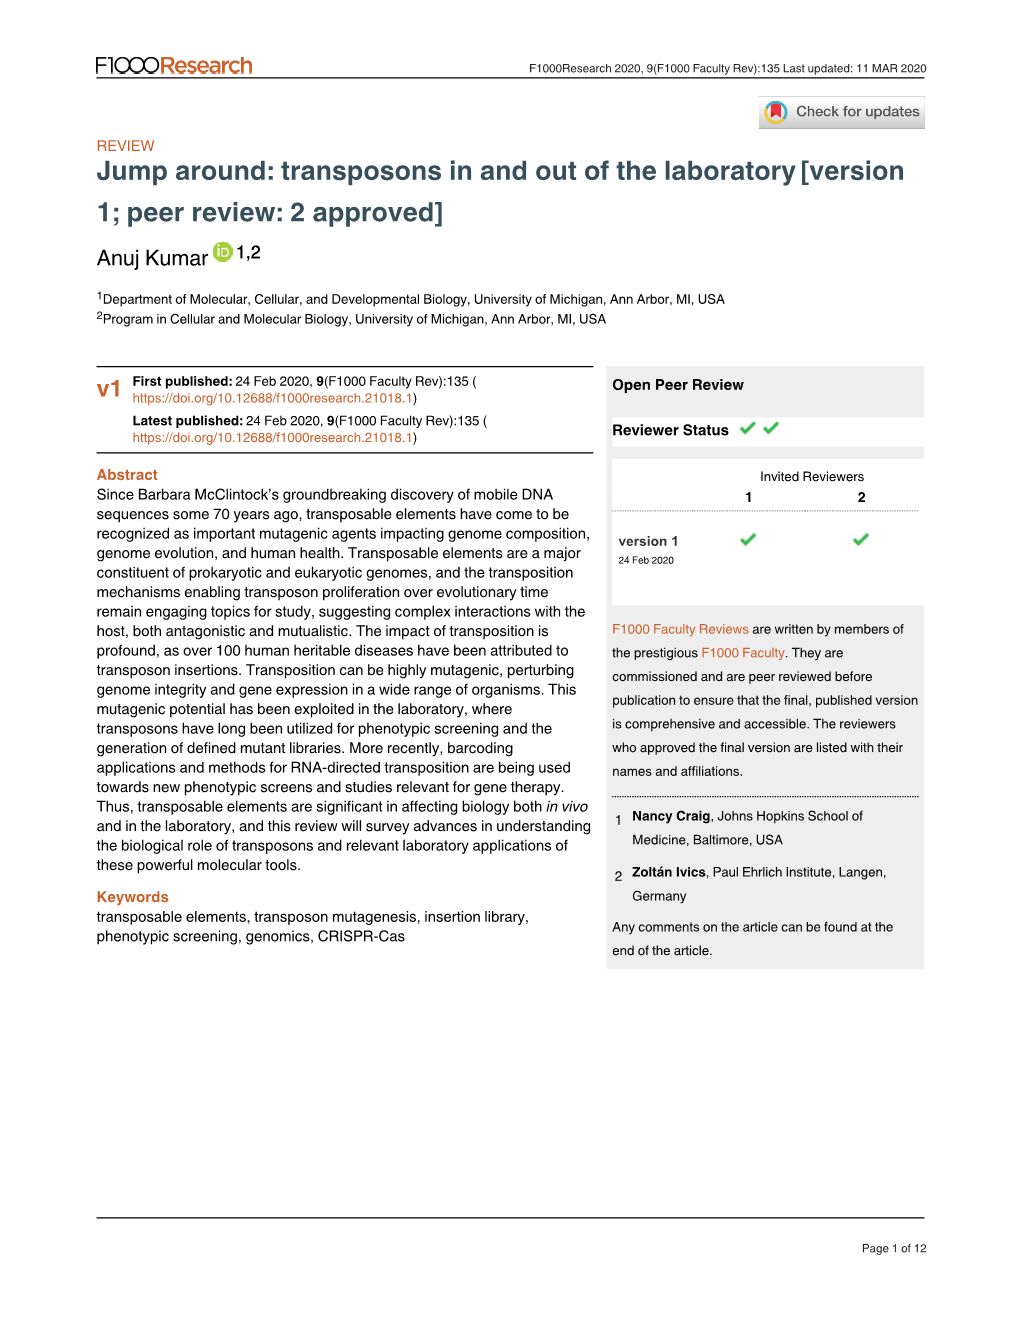 Jump Around: Transposons in and out of the Laboratory[Version 1; Peer Review: 2 Approved]